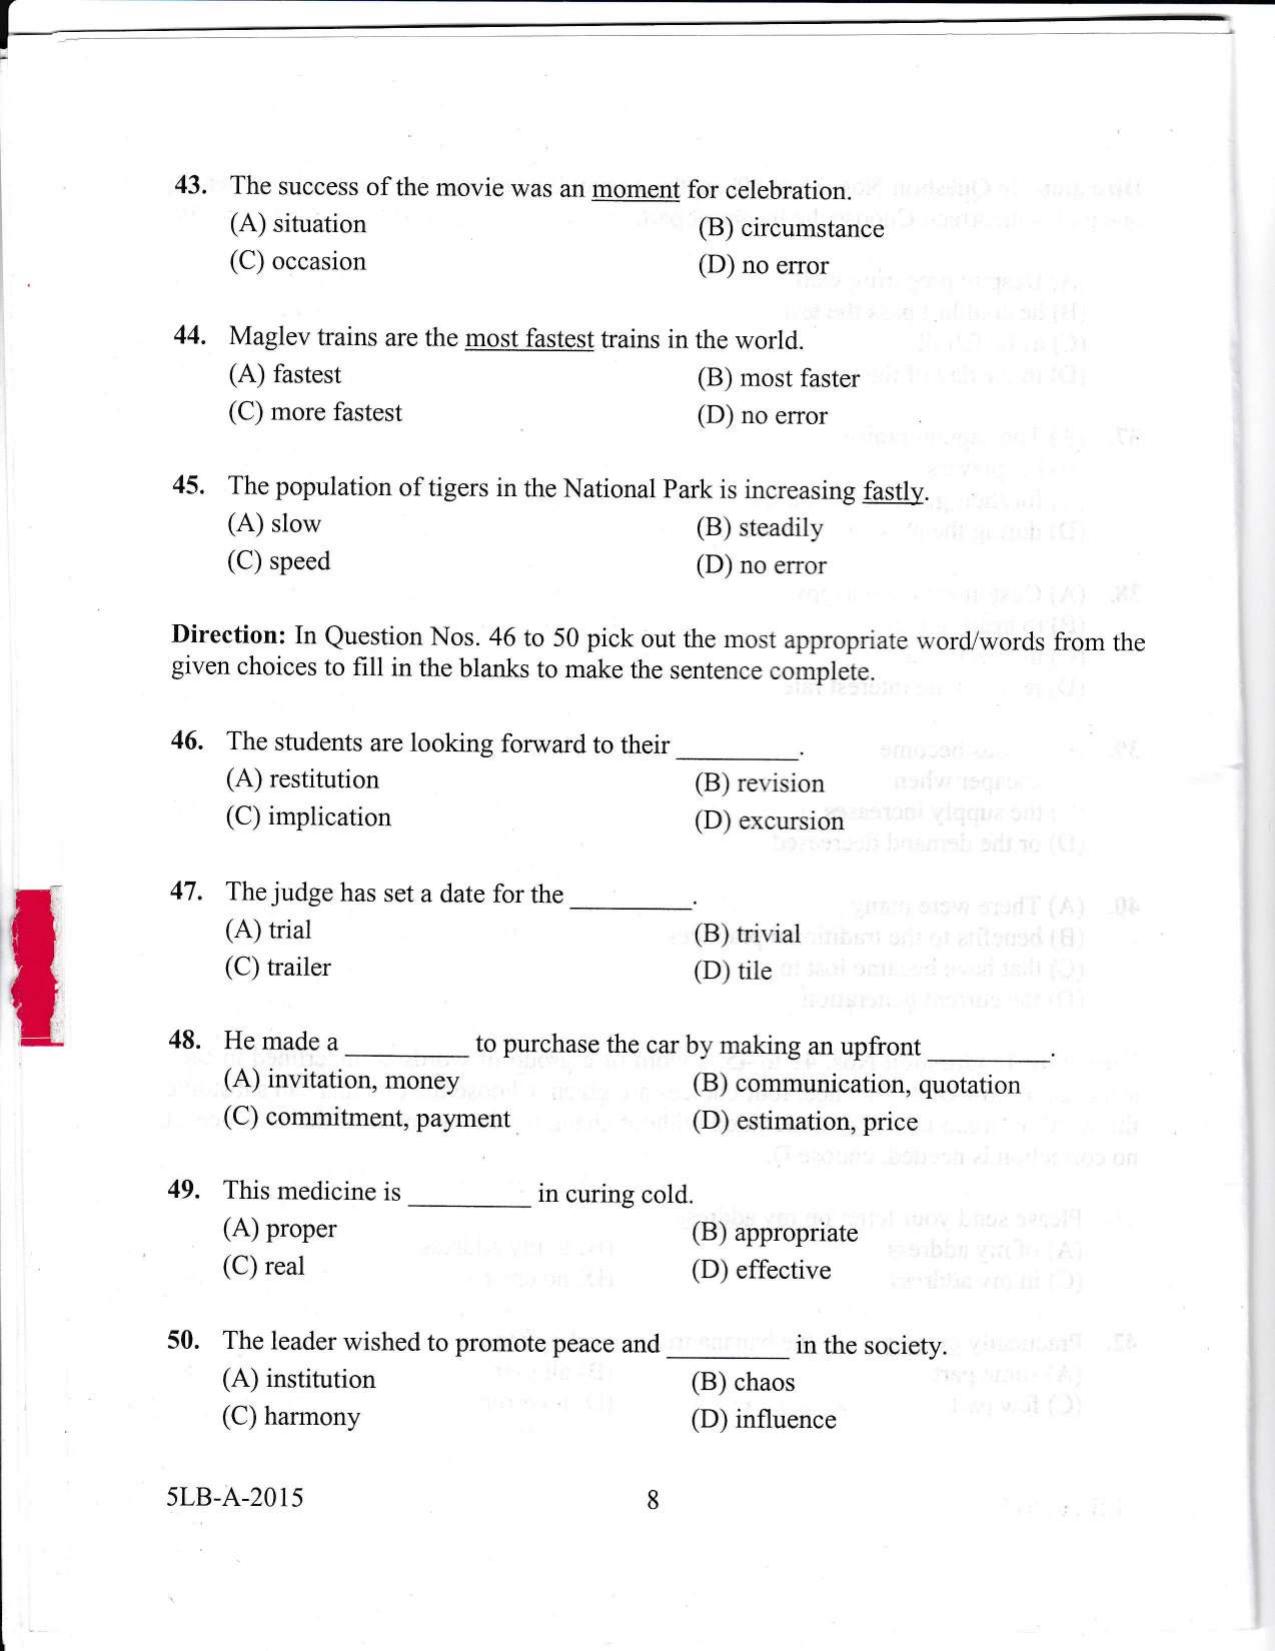 KLEE 5 Year LLB Exam 2015 Question Paper - Page 8